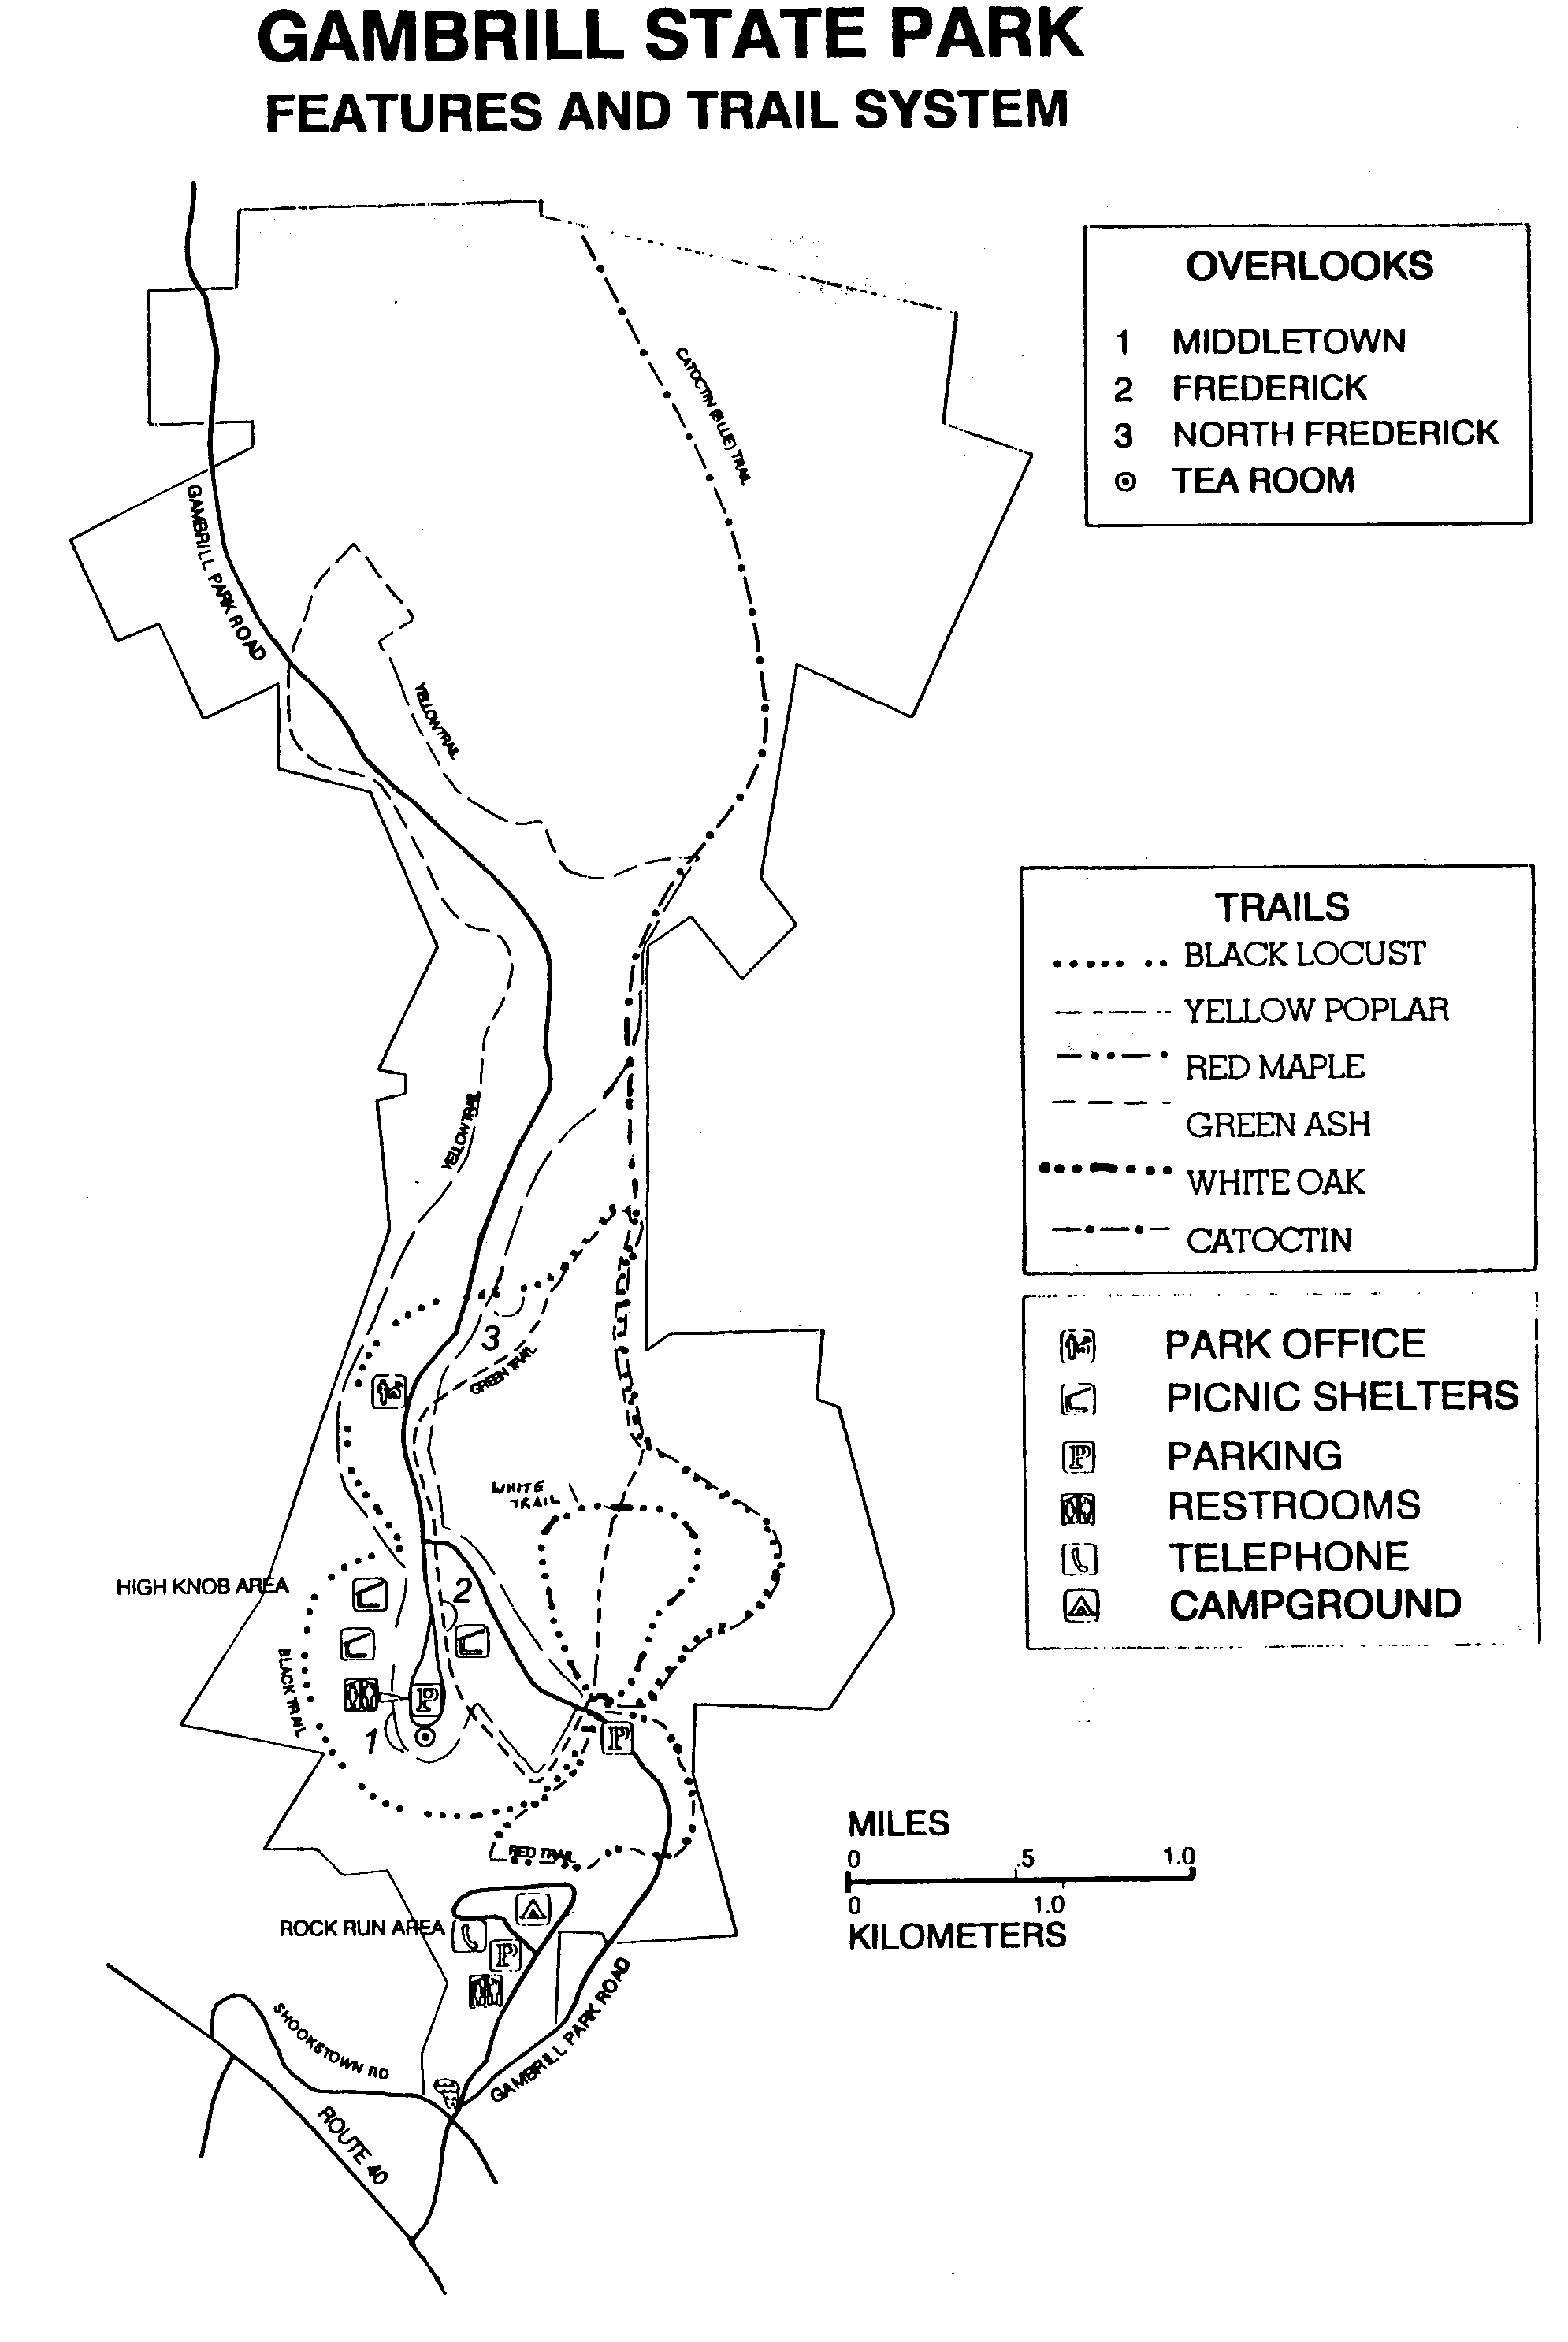 Gambrill State park Trail Systems Map